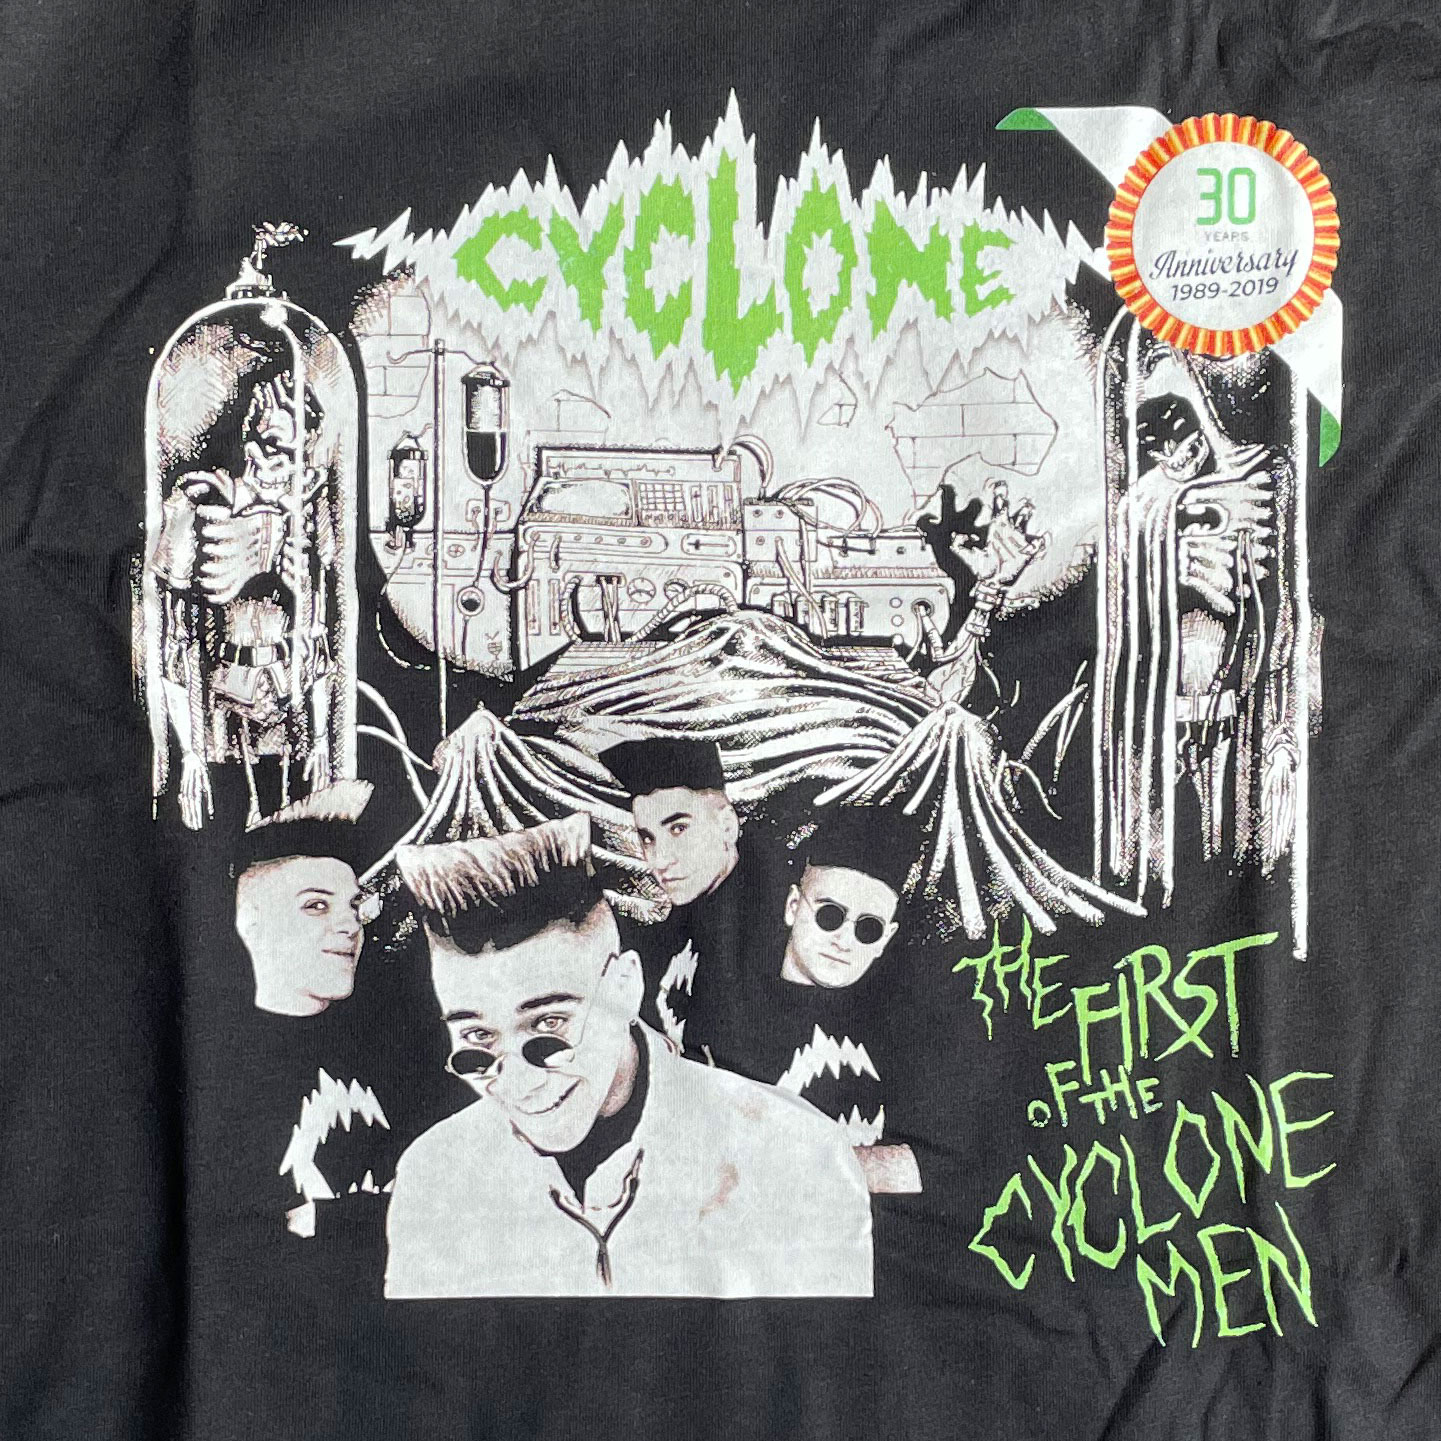 CYCLONE Tシャツ The First Of The Cyclone Men オフィシャル